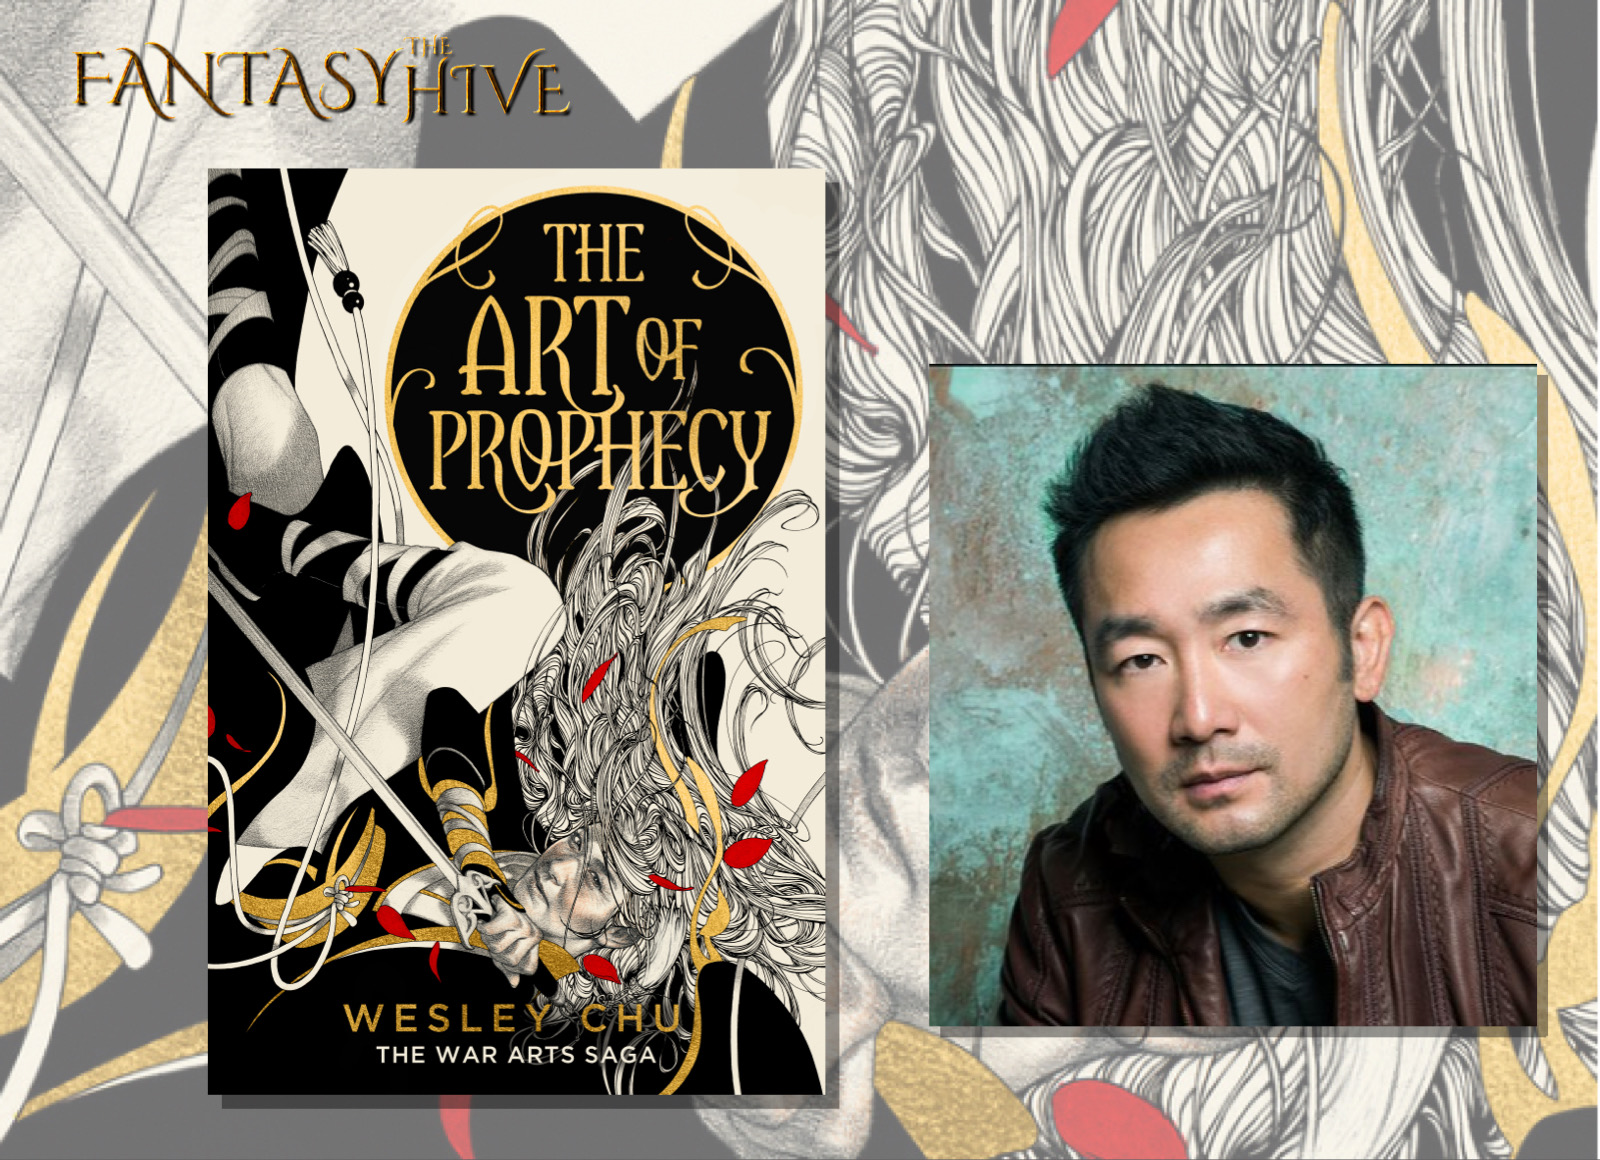 Interview with Wesley Chu (THE ART OF PROPHECY)